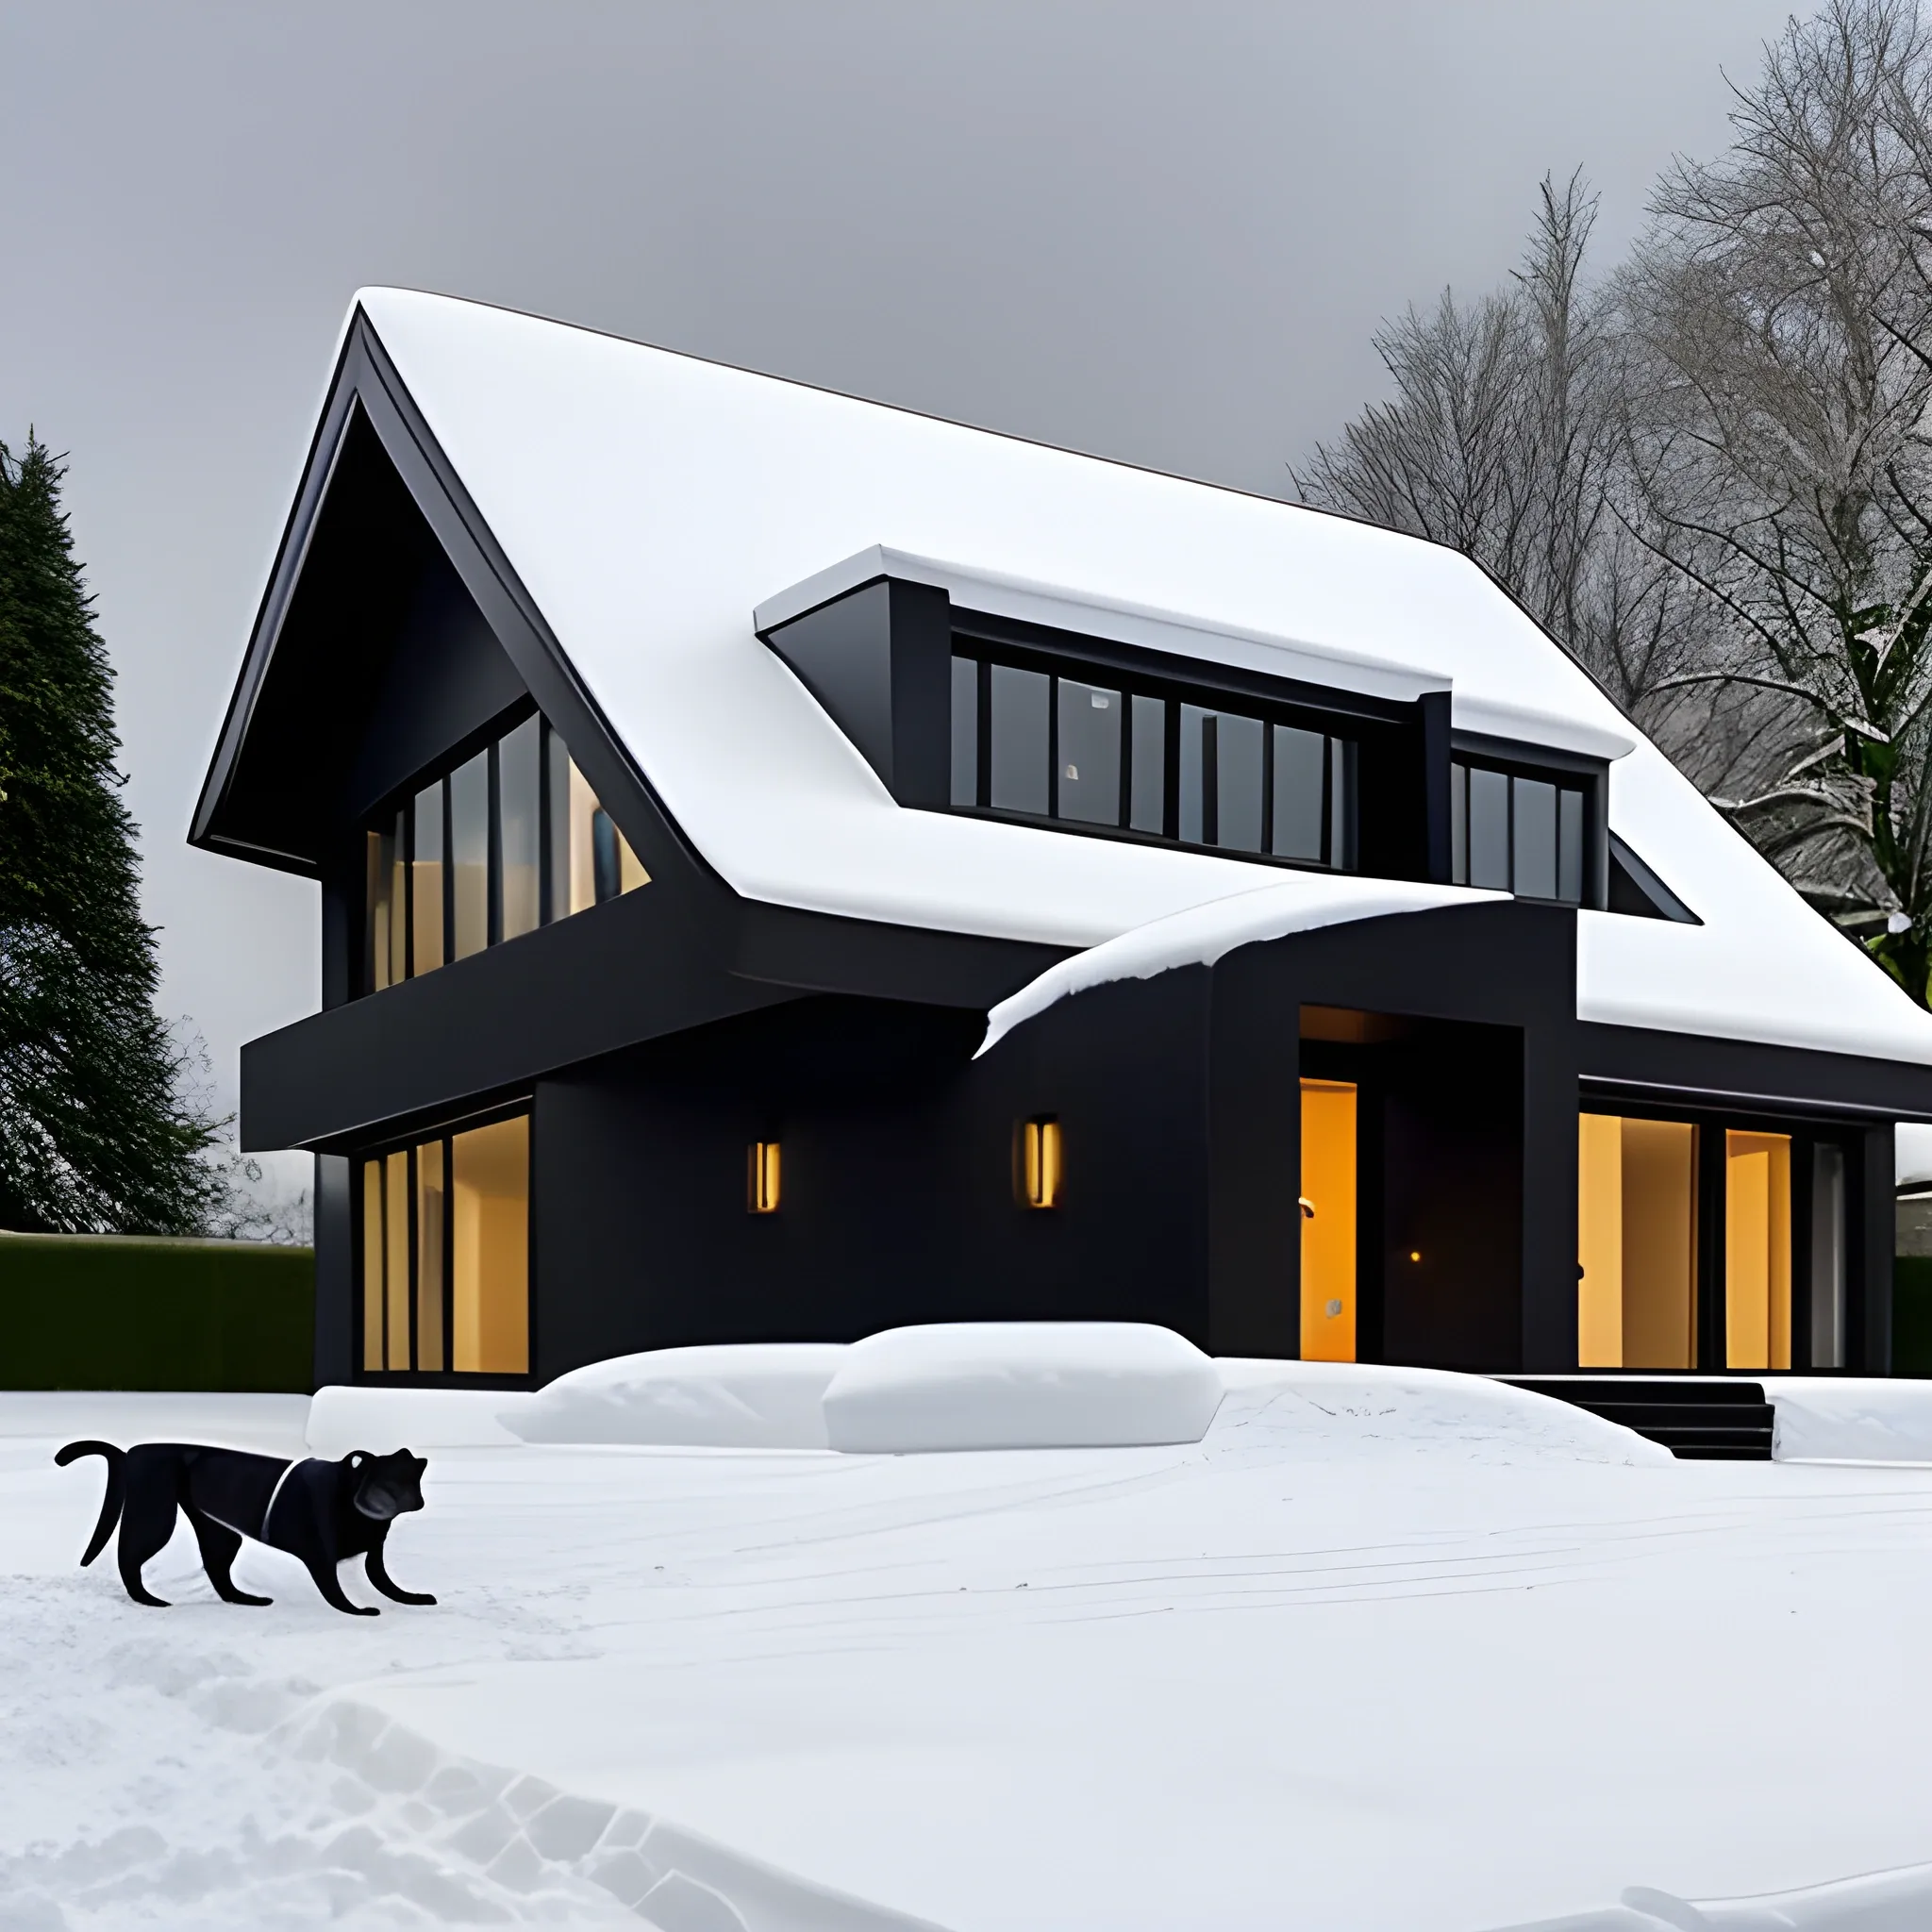 Two dogs: One A huge all-black pitbull dog, with big head and bright yellow eyes, and the other, a all-white little female maltese dog, tending a huge yard of a big beautiful modern house in the countryside, with snow falling from the skies.